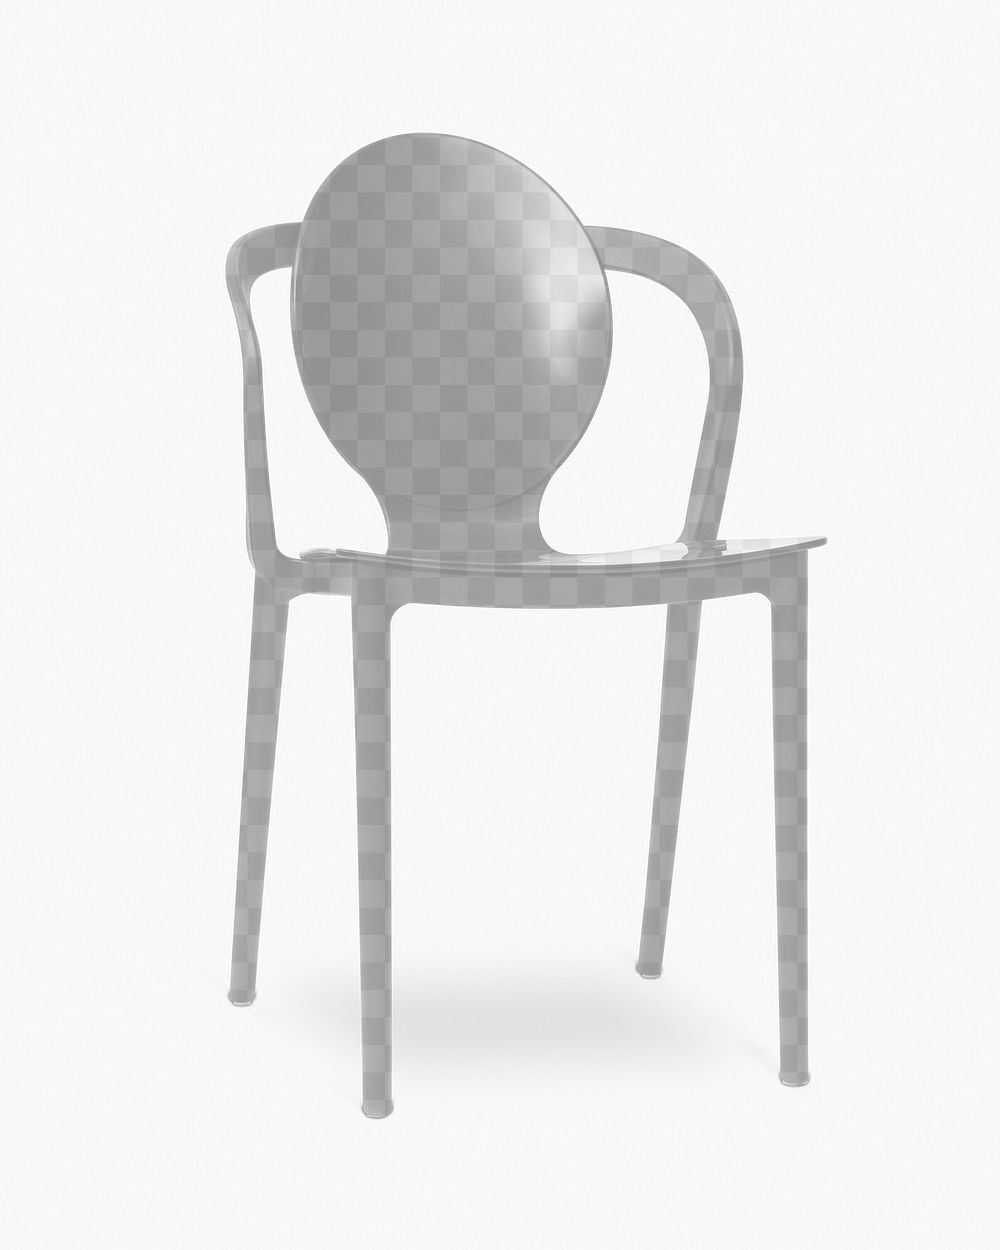 Modern shape dining chair png mockup